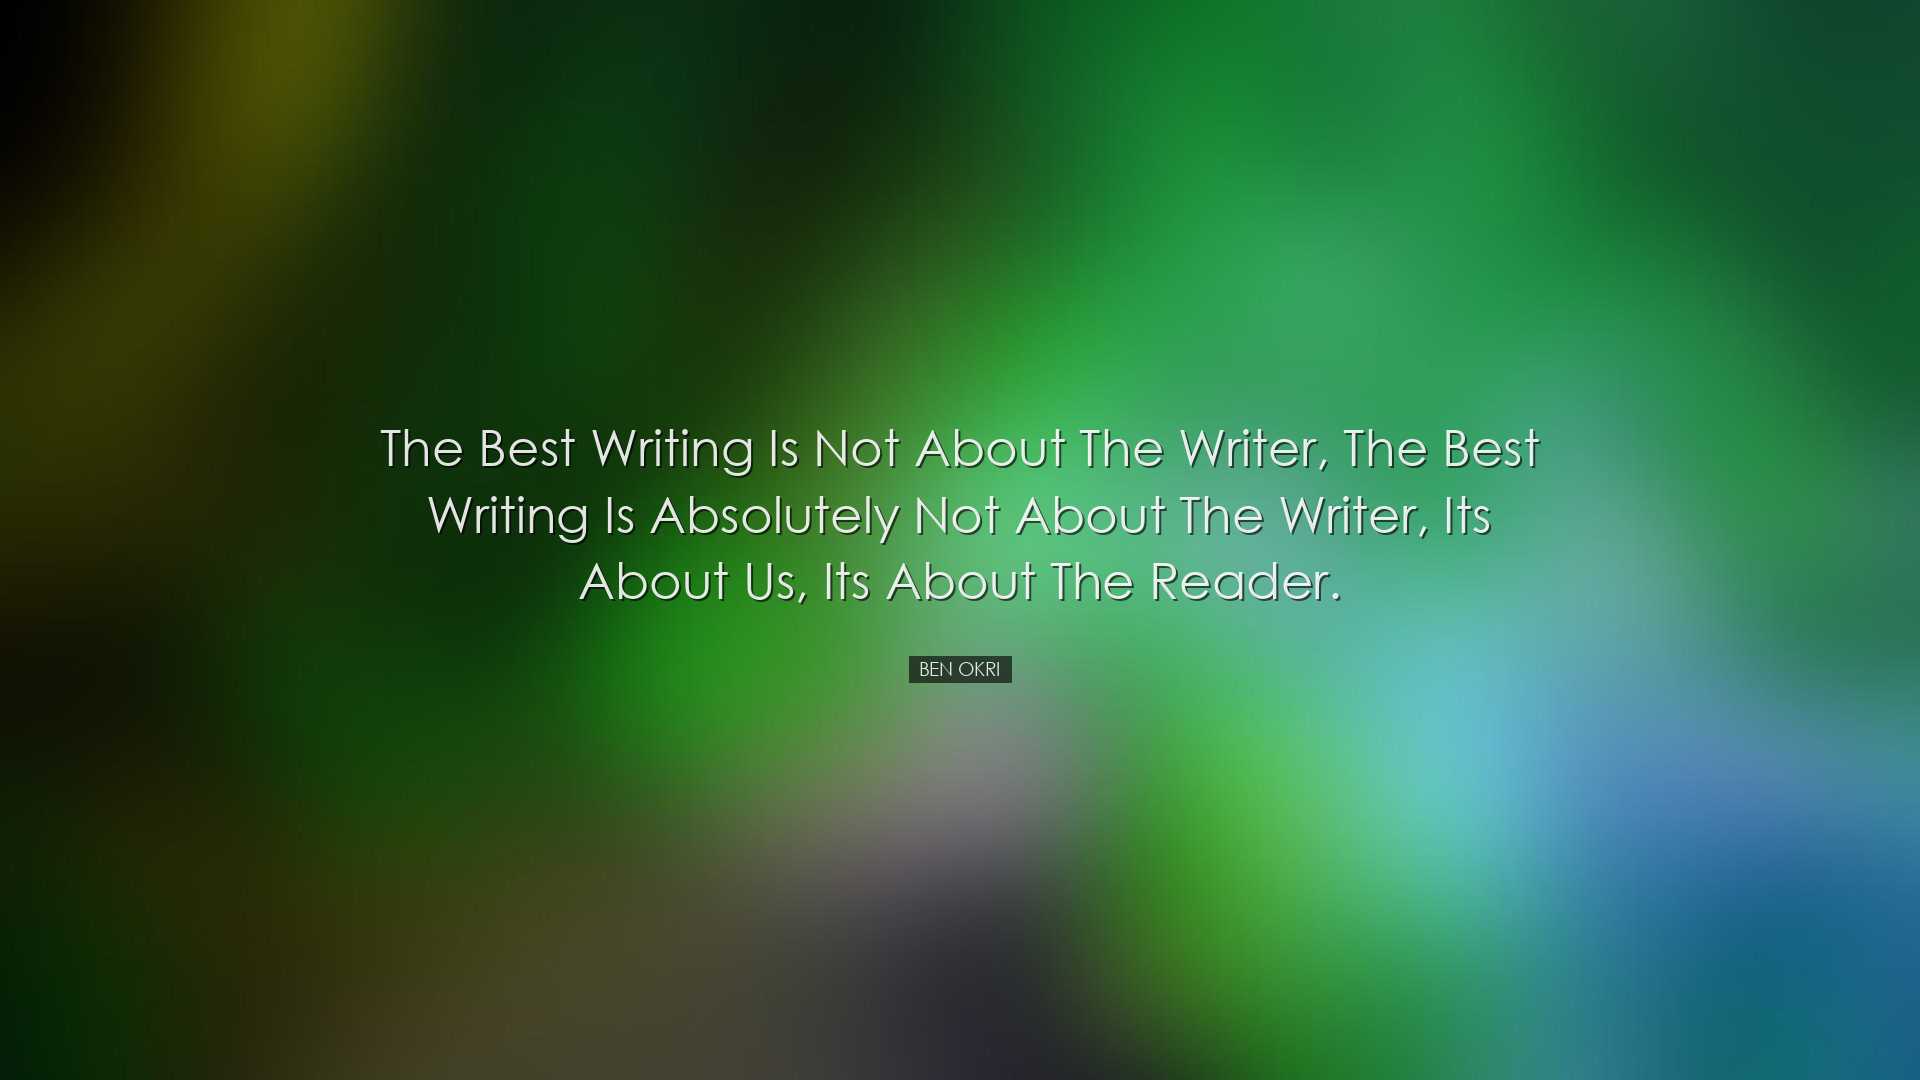 The best writing is not about the writer, the best writing is abso